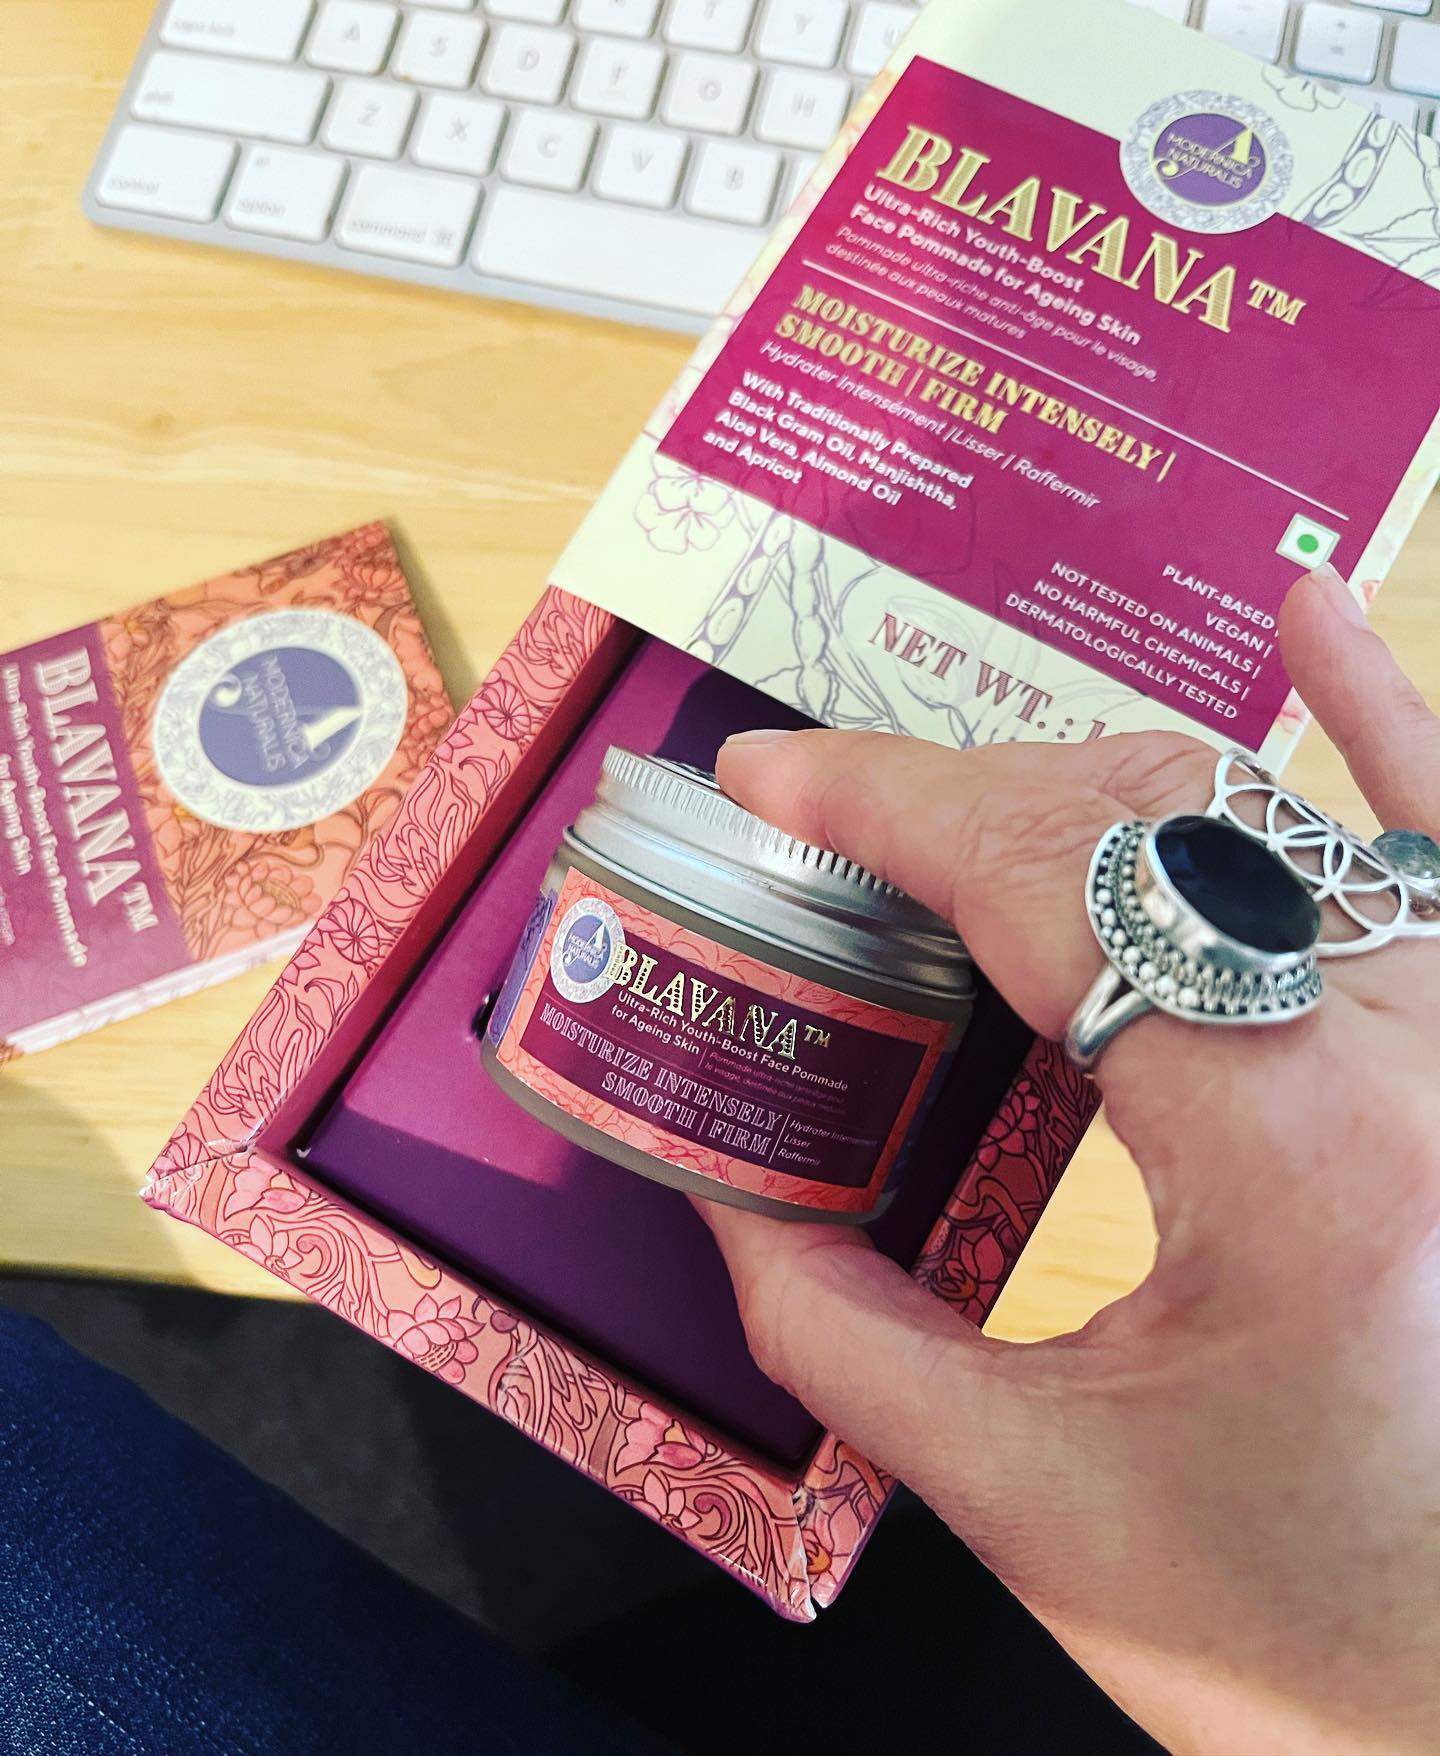 @theayurvedaexperience Blavana Ultra-Rich Youth-Boost Face Pomade for Aging Skin just landed on my desk, ready to be judged in the 2022 @certclean Clean Beauty Awards 😍 With its secret youth recipe boasting black gram lentil, I’m keen to see how my skin responds! 

If you’ve tried this and love it, please share in the comments!
.
.
.
#cleanbeautyawards #beautyawards #moisturiser #blackgramlentil #skincare #blavana #ayurevda #cream #journalisr #beautyeditor #writer #shannondunn #shineyourlight